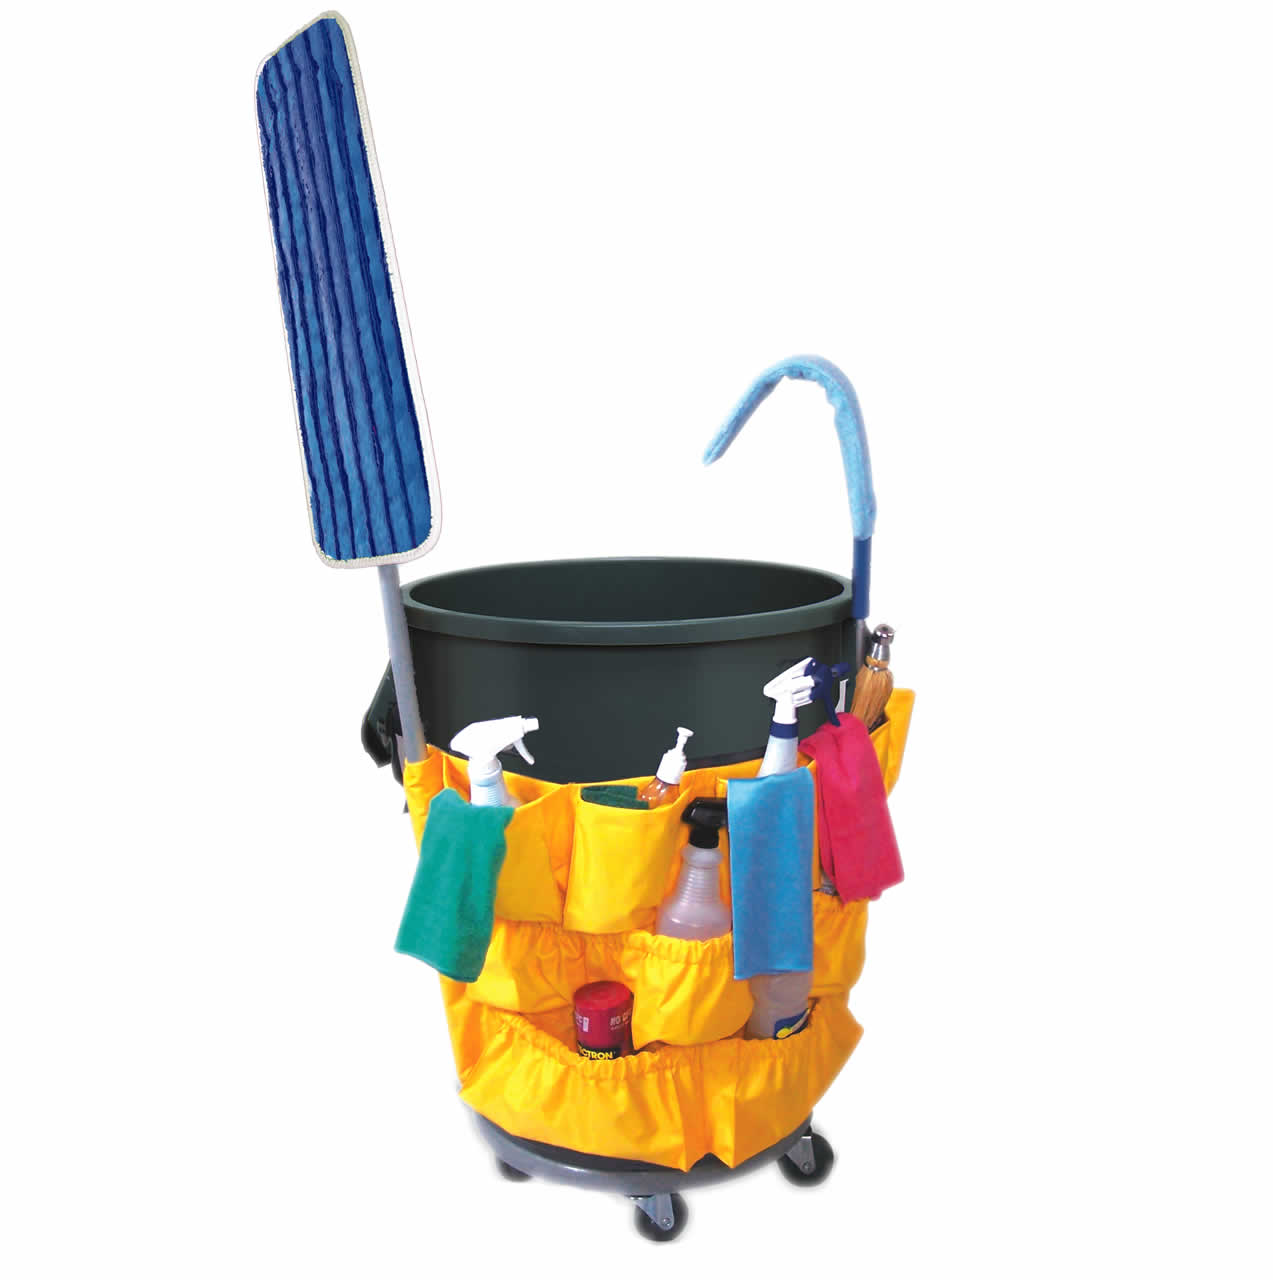 trashcan-with-accessories.jpg